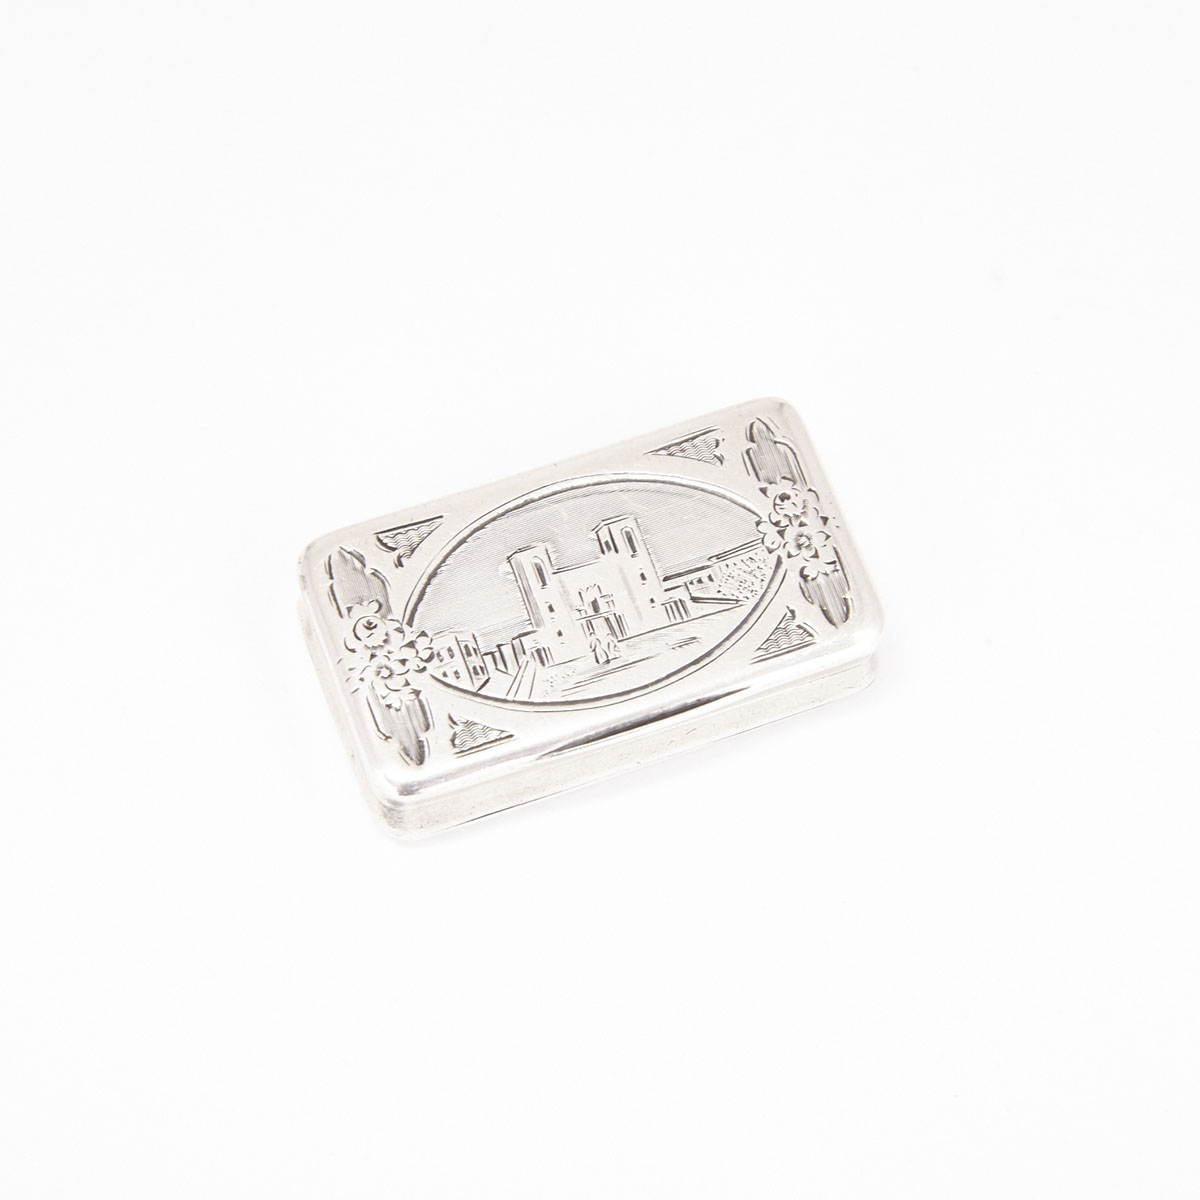 French Silver Engraved Rectangular Snuff Box, mid-19th century